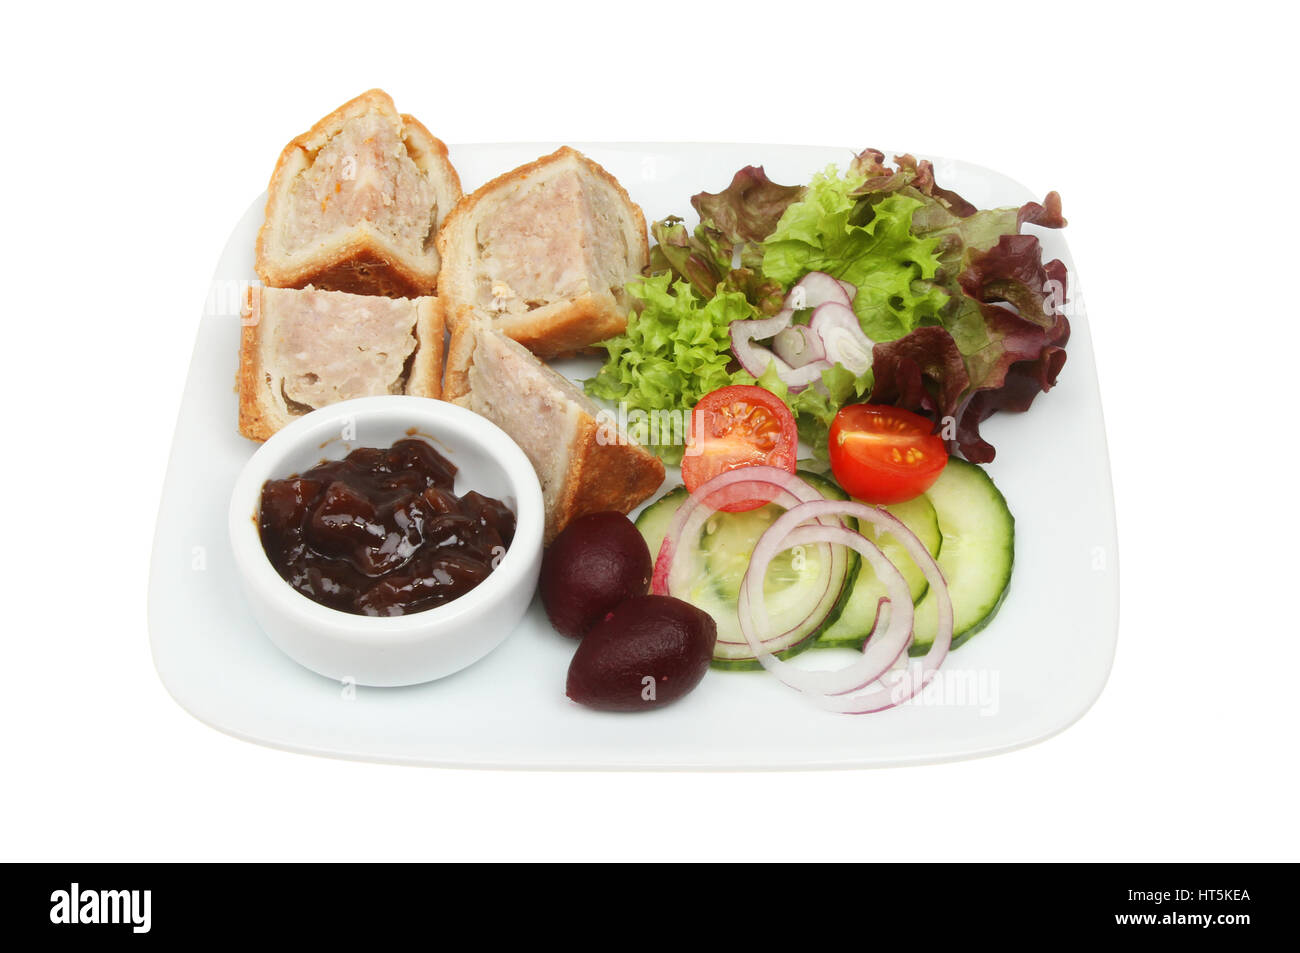 Pork pie, pickle and salad on a plate isolated against white Stock Photo